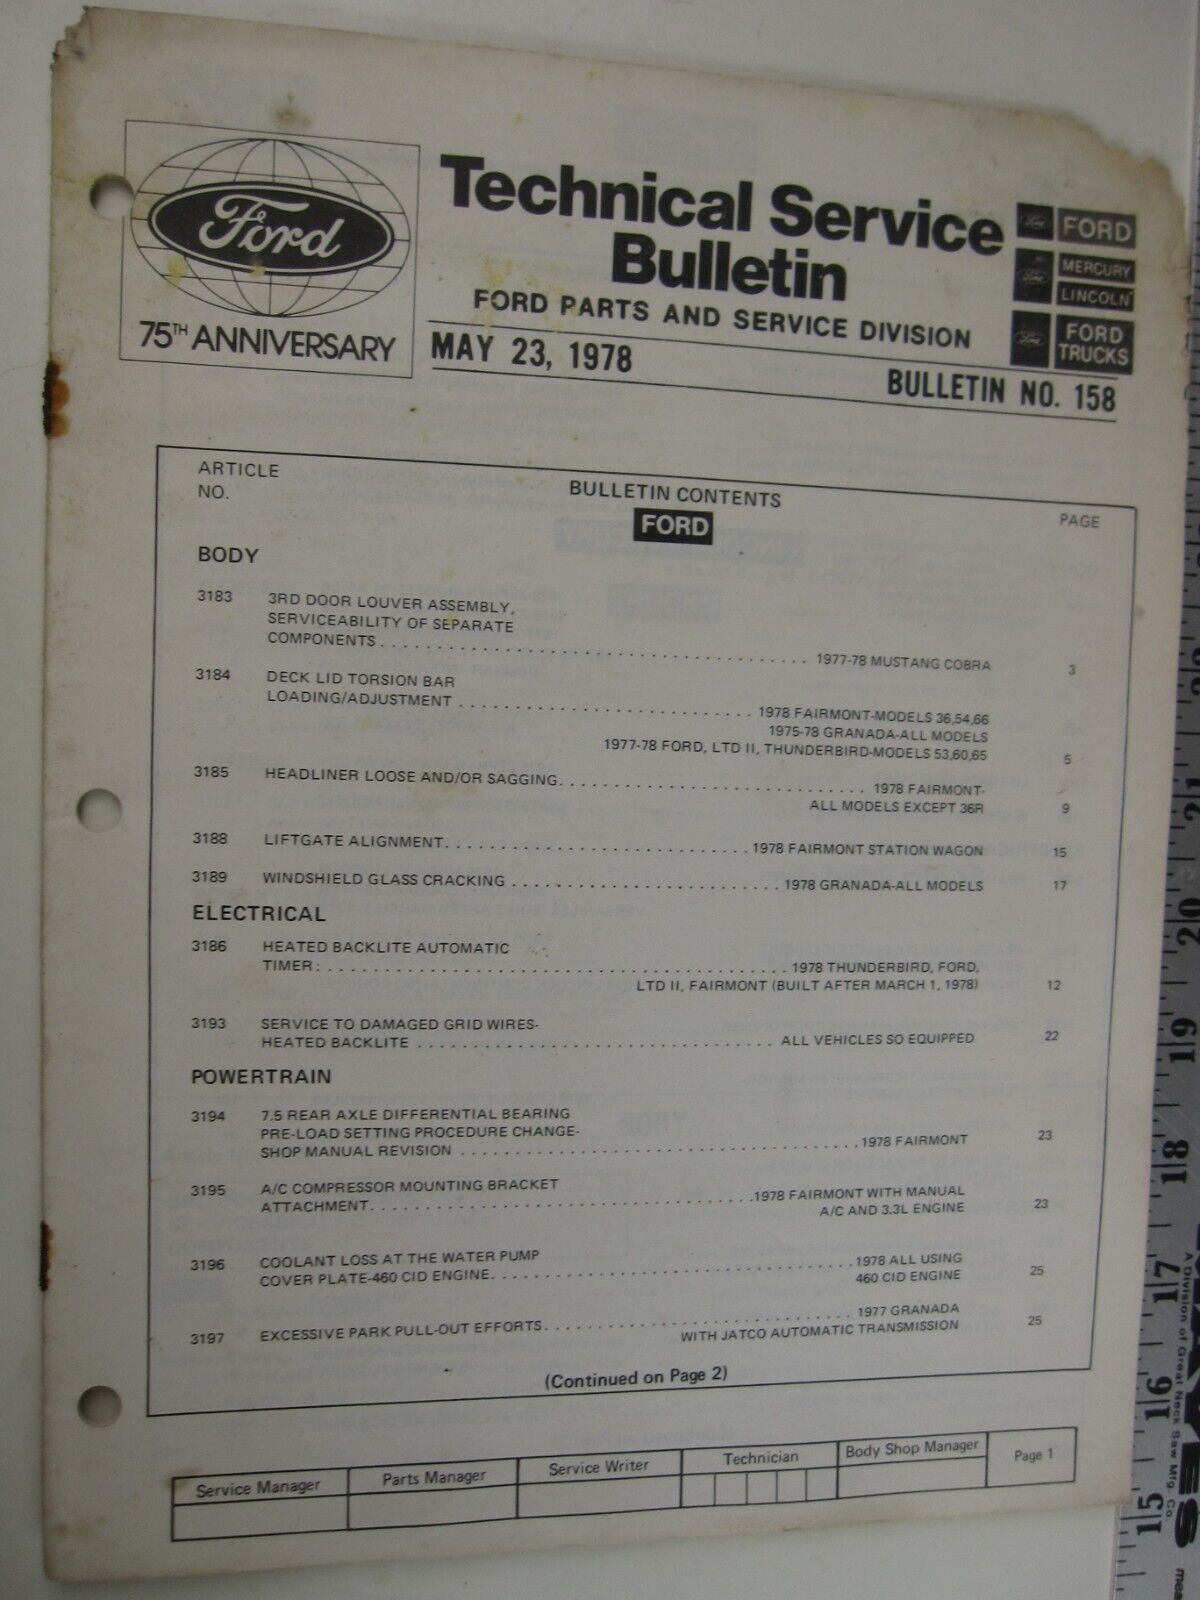 May 23, 1978 FORD Technical Service Bulletin Number 158  BIS